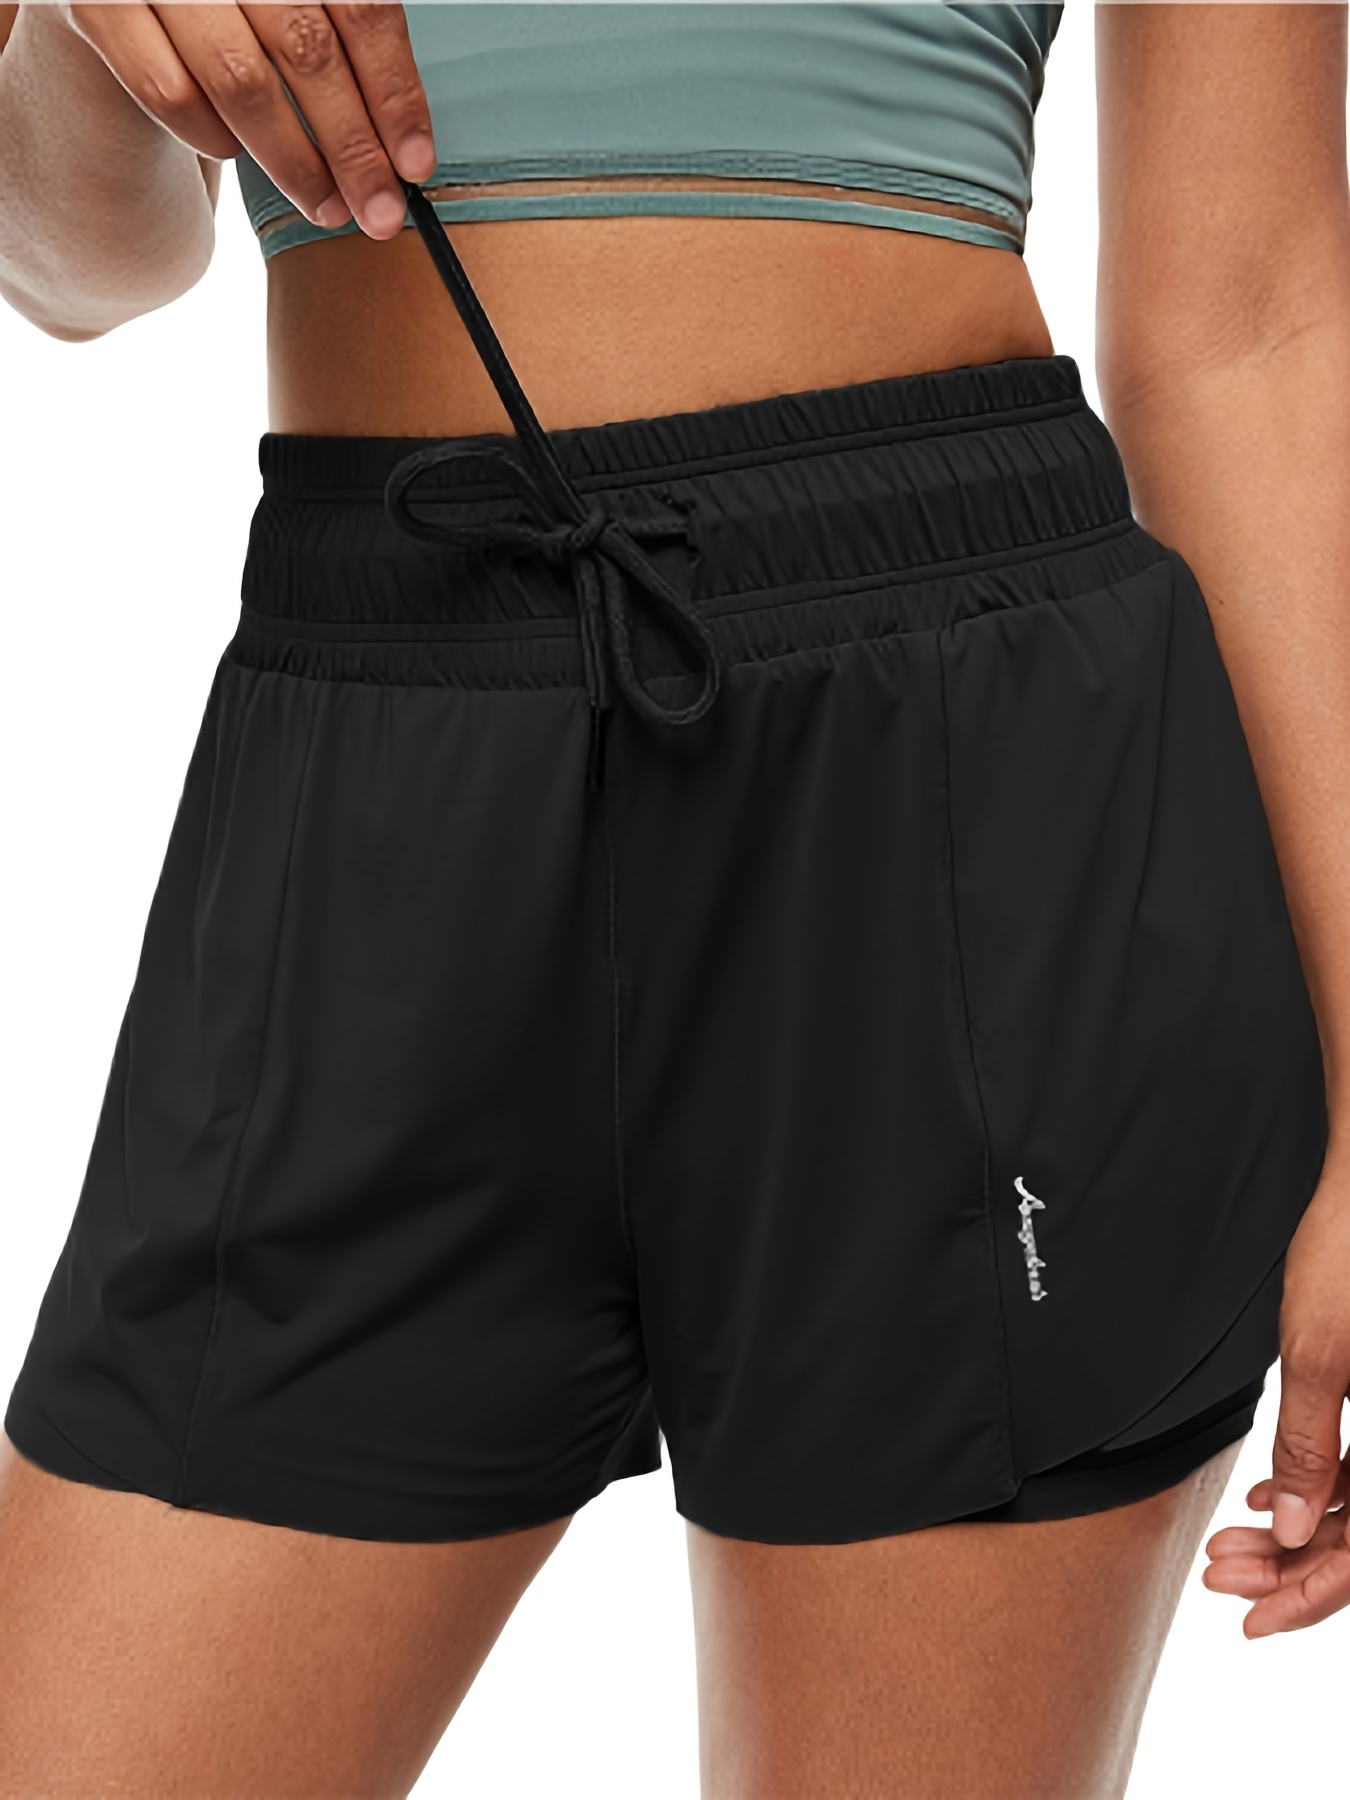 Summer Womens Black Yoga Shorts For Women High Elastic Waist, Slim Fit,  Solid Color, Perfect For Fitness And Exercise From Play_sports, $6.52